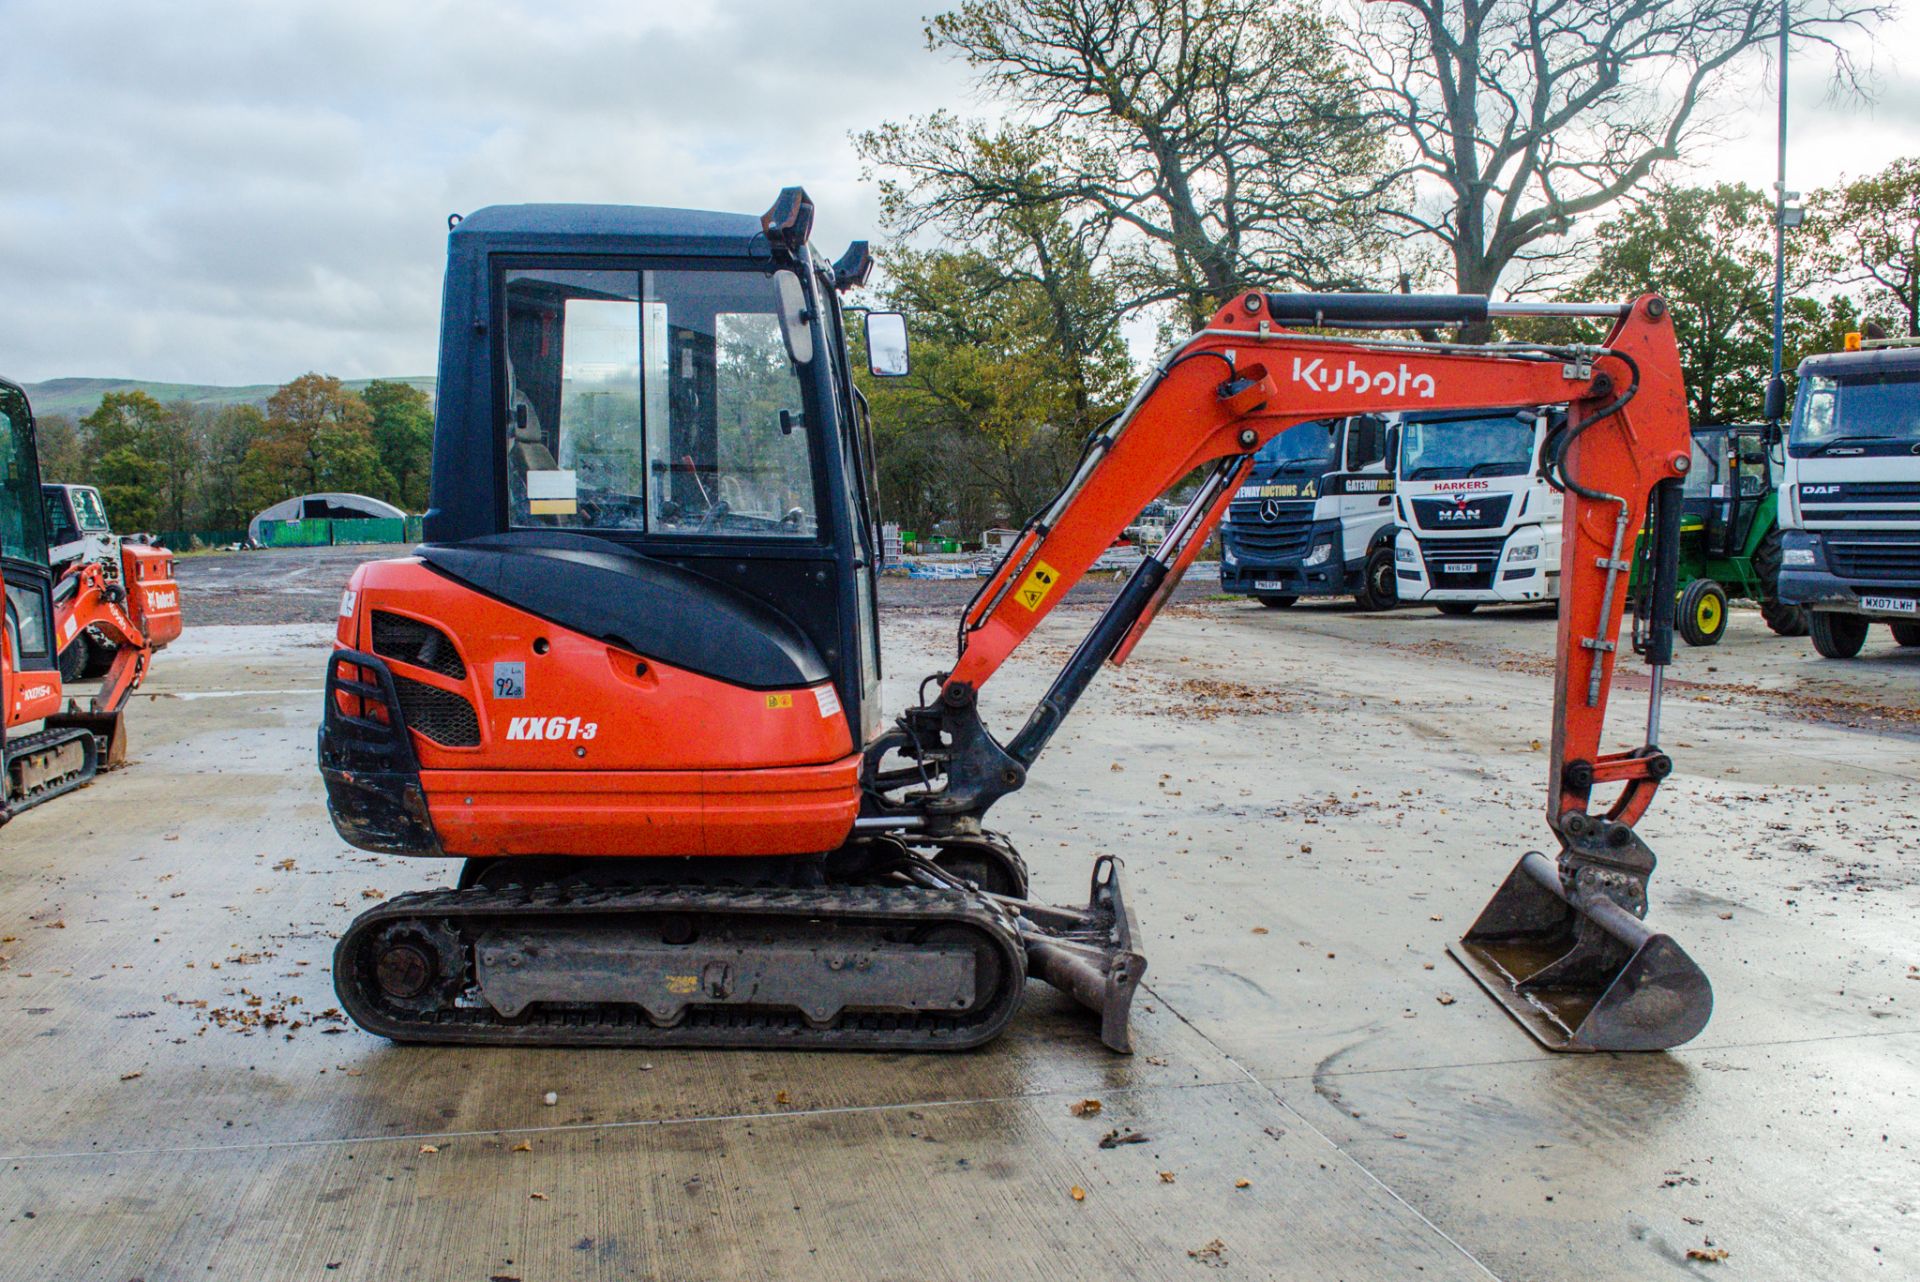 Kubota KX61-3 2.6 tonne rubber tracked excavator Year: 2015 S/N: 81787 Recorded Hours: 2860 EXC149 - Image 7 of 18